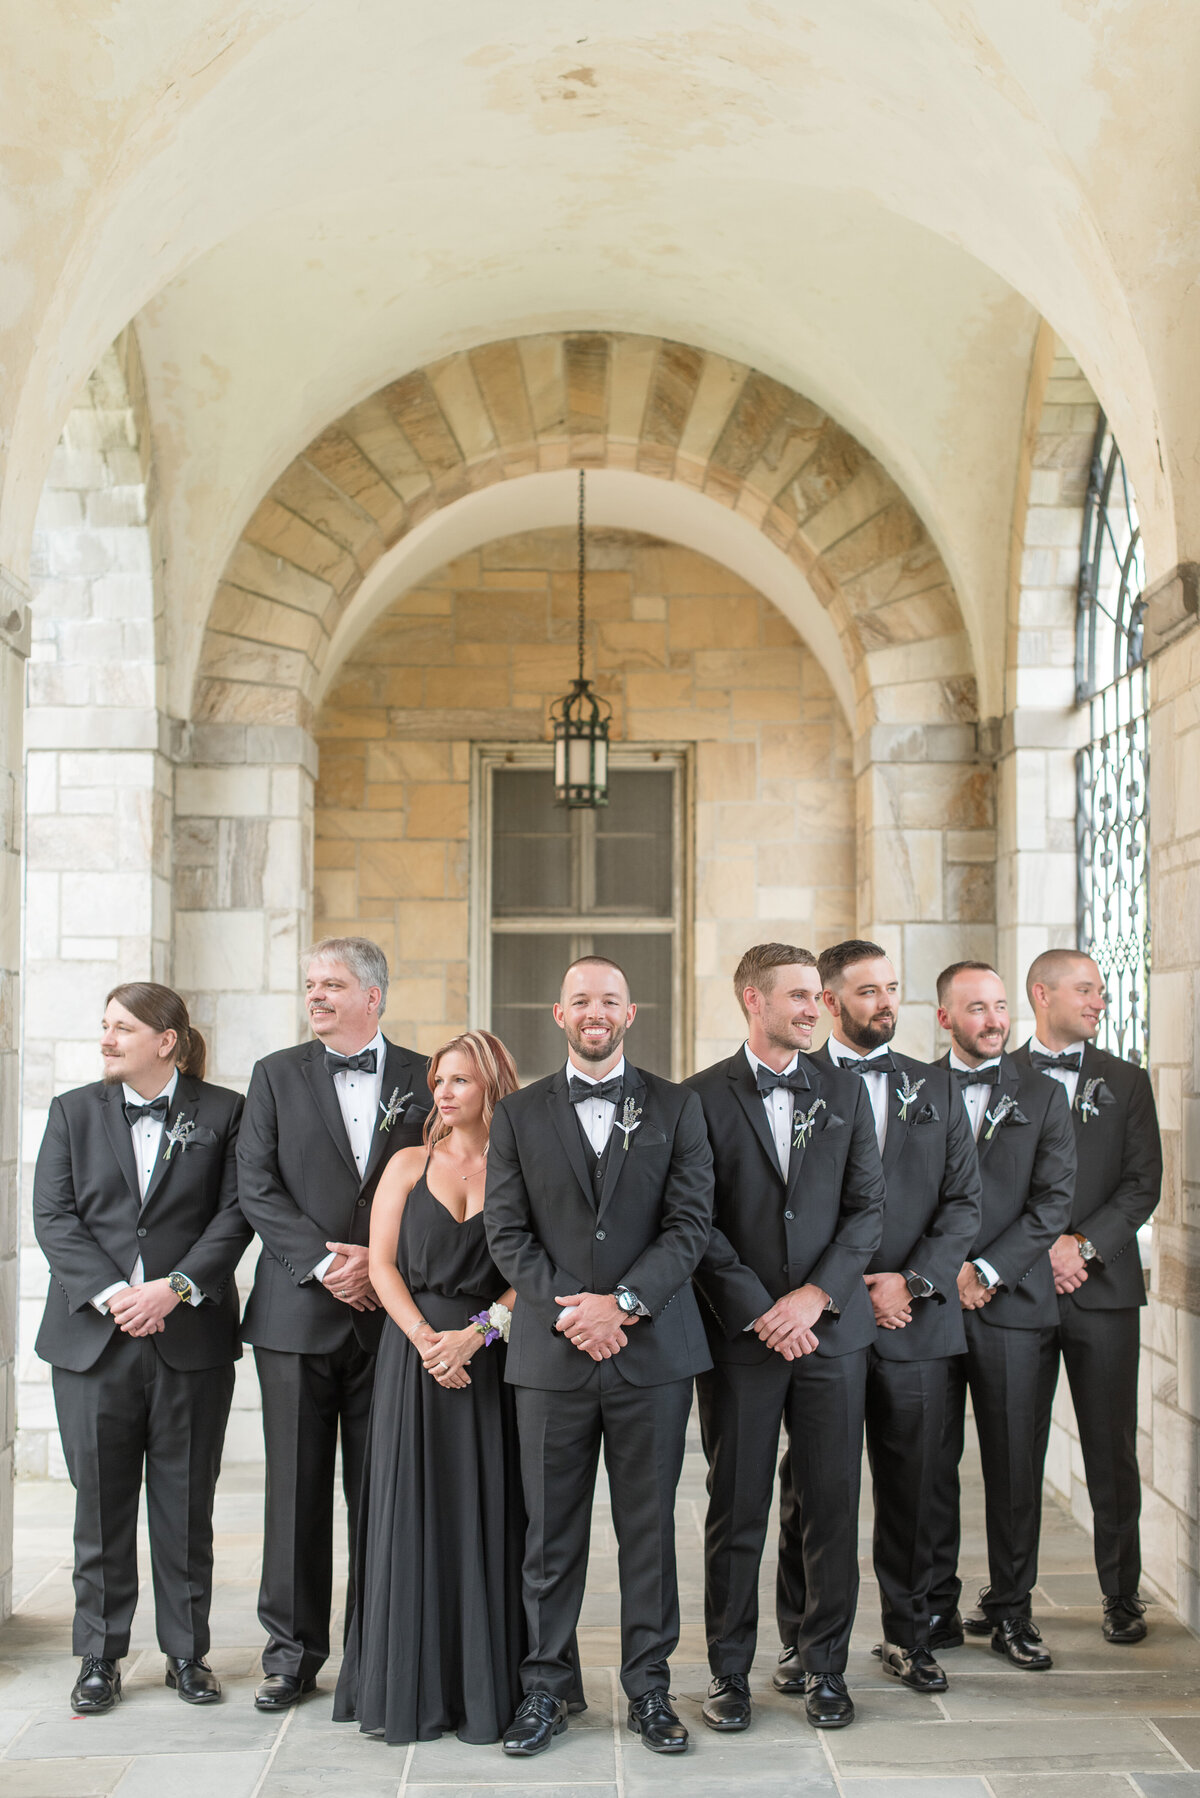 Groom with his groomsmen and best woman all wearing black and standing in a v-shape outside Catholic church.